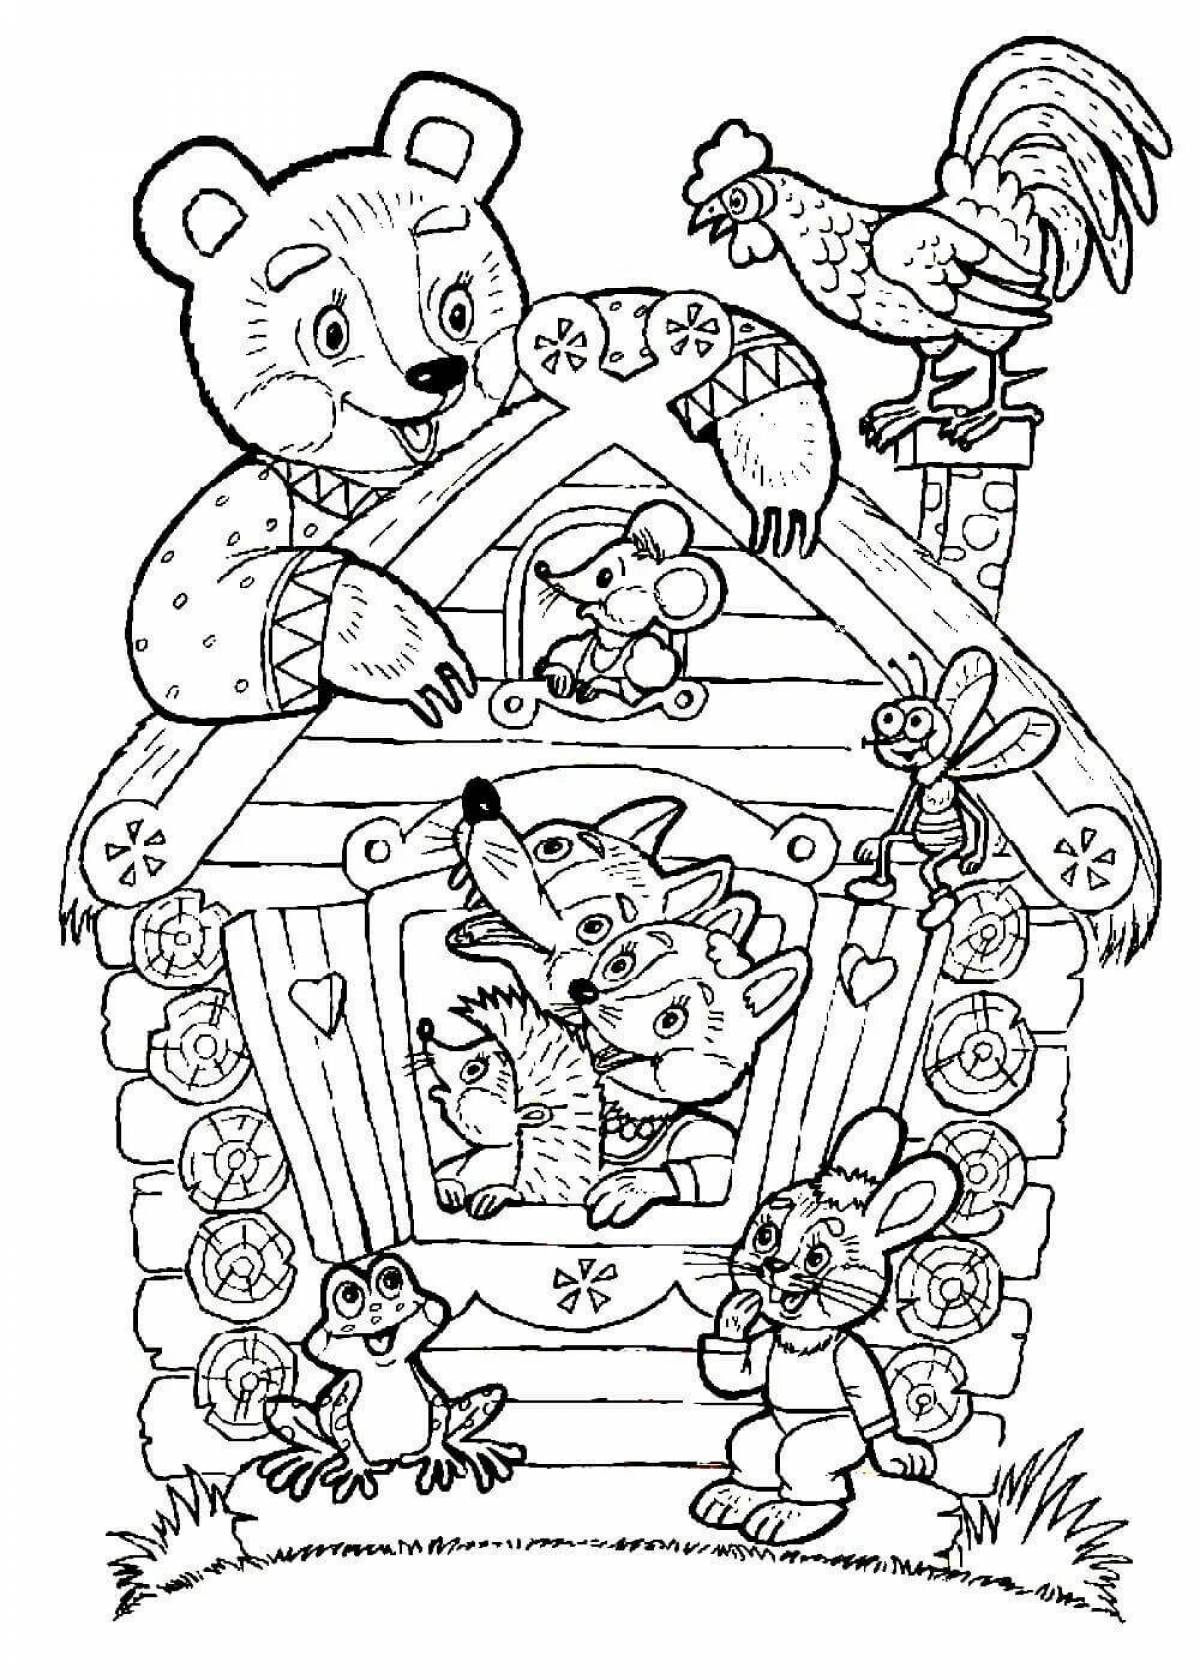 Majestic retreat cabin coloring page